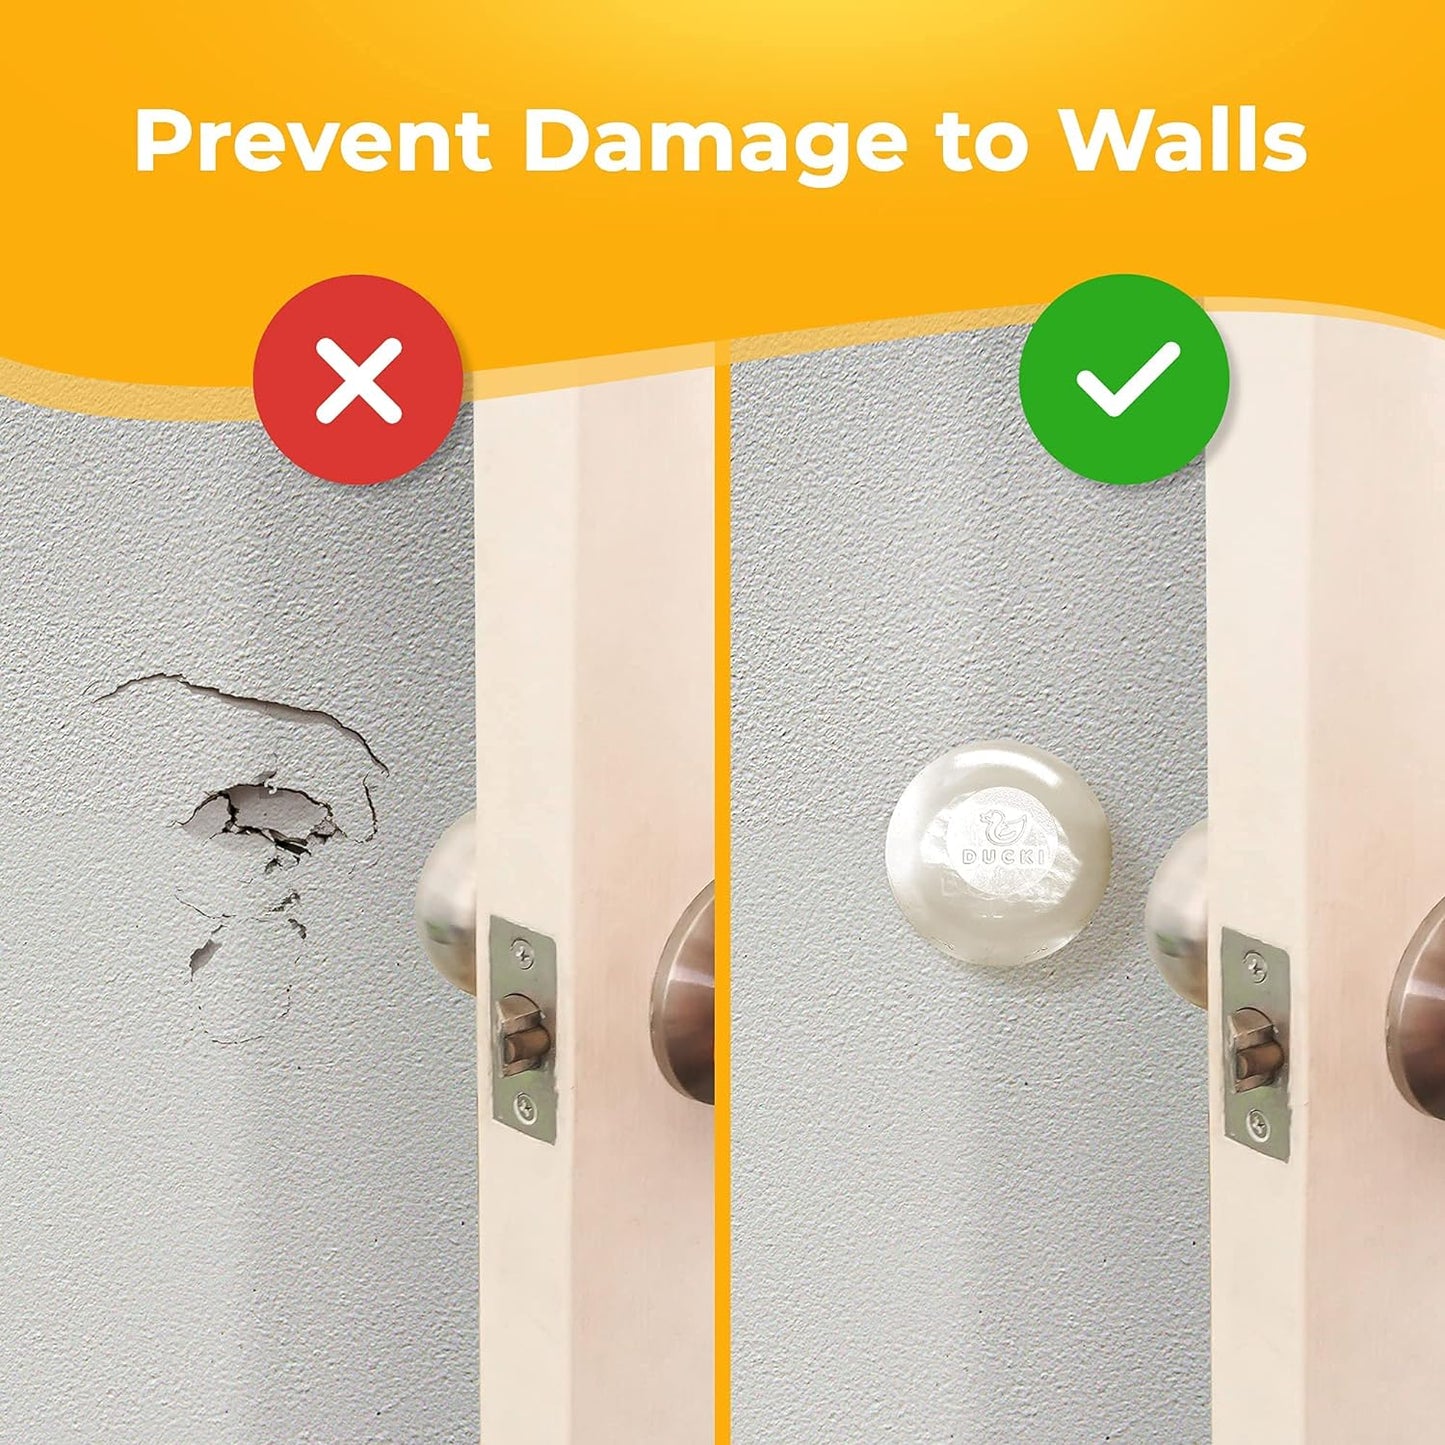 Wall Protectors - 4 Pack Clear Self Adhesive, Reusable Solution for Stopping Damage & Noise from Doors, Refrigerators More in Your Home or Office Durable, Shock Absorbent Discreet